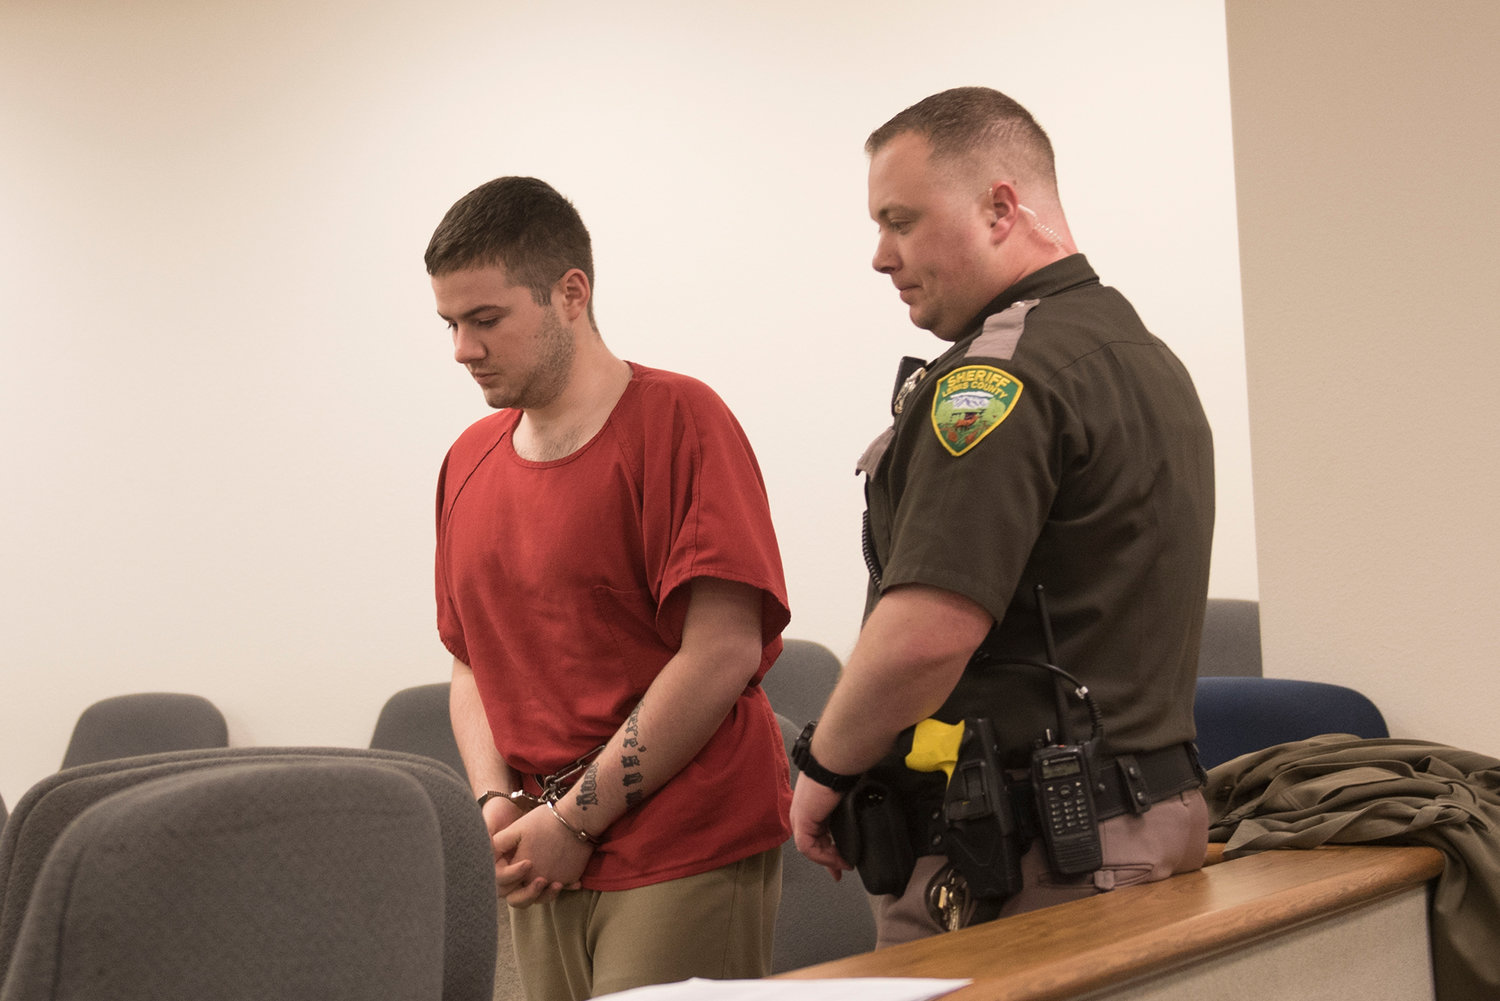 Jonathon Adamson appears at an arraignment hearing in Lewis County Superior Court on Thursday, March 7, 2019.